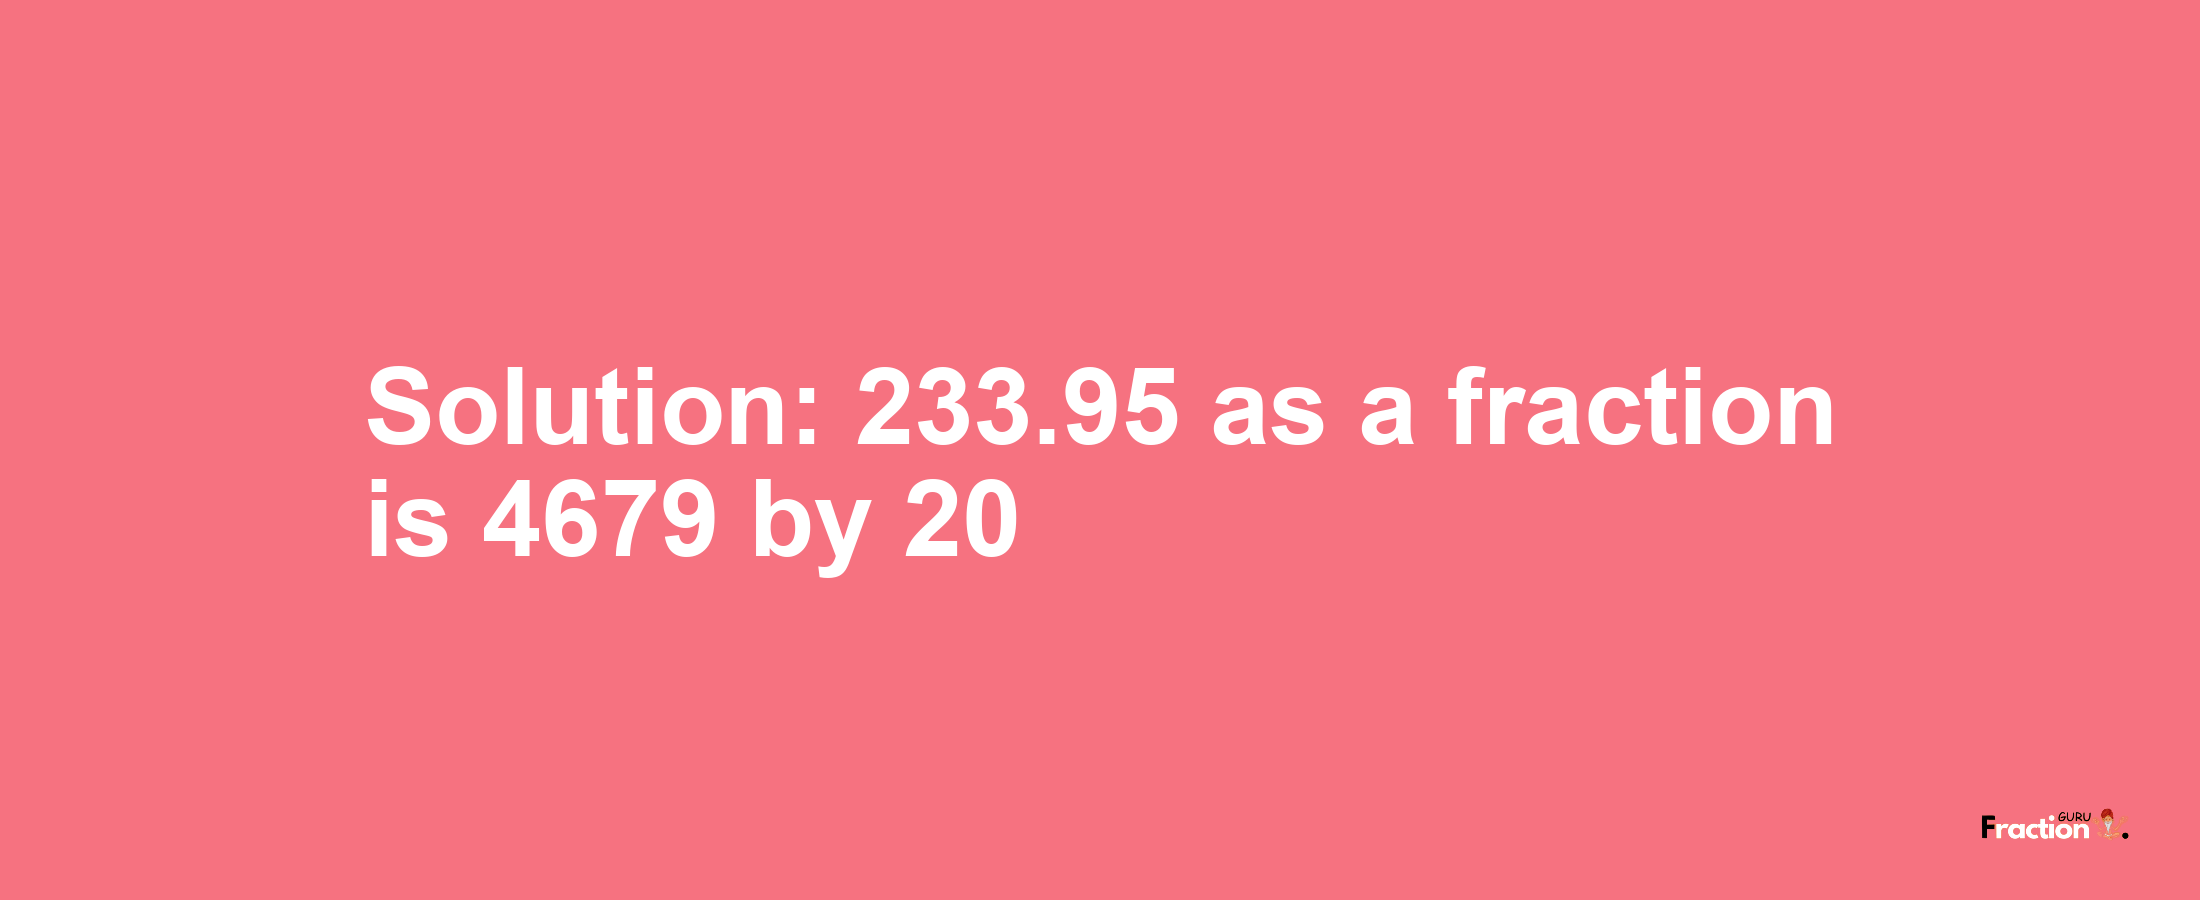 Solution:233.95 as a fraction is 4679/20